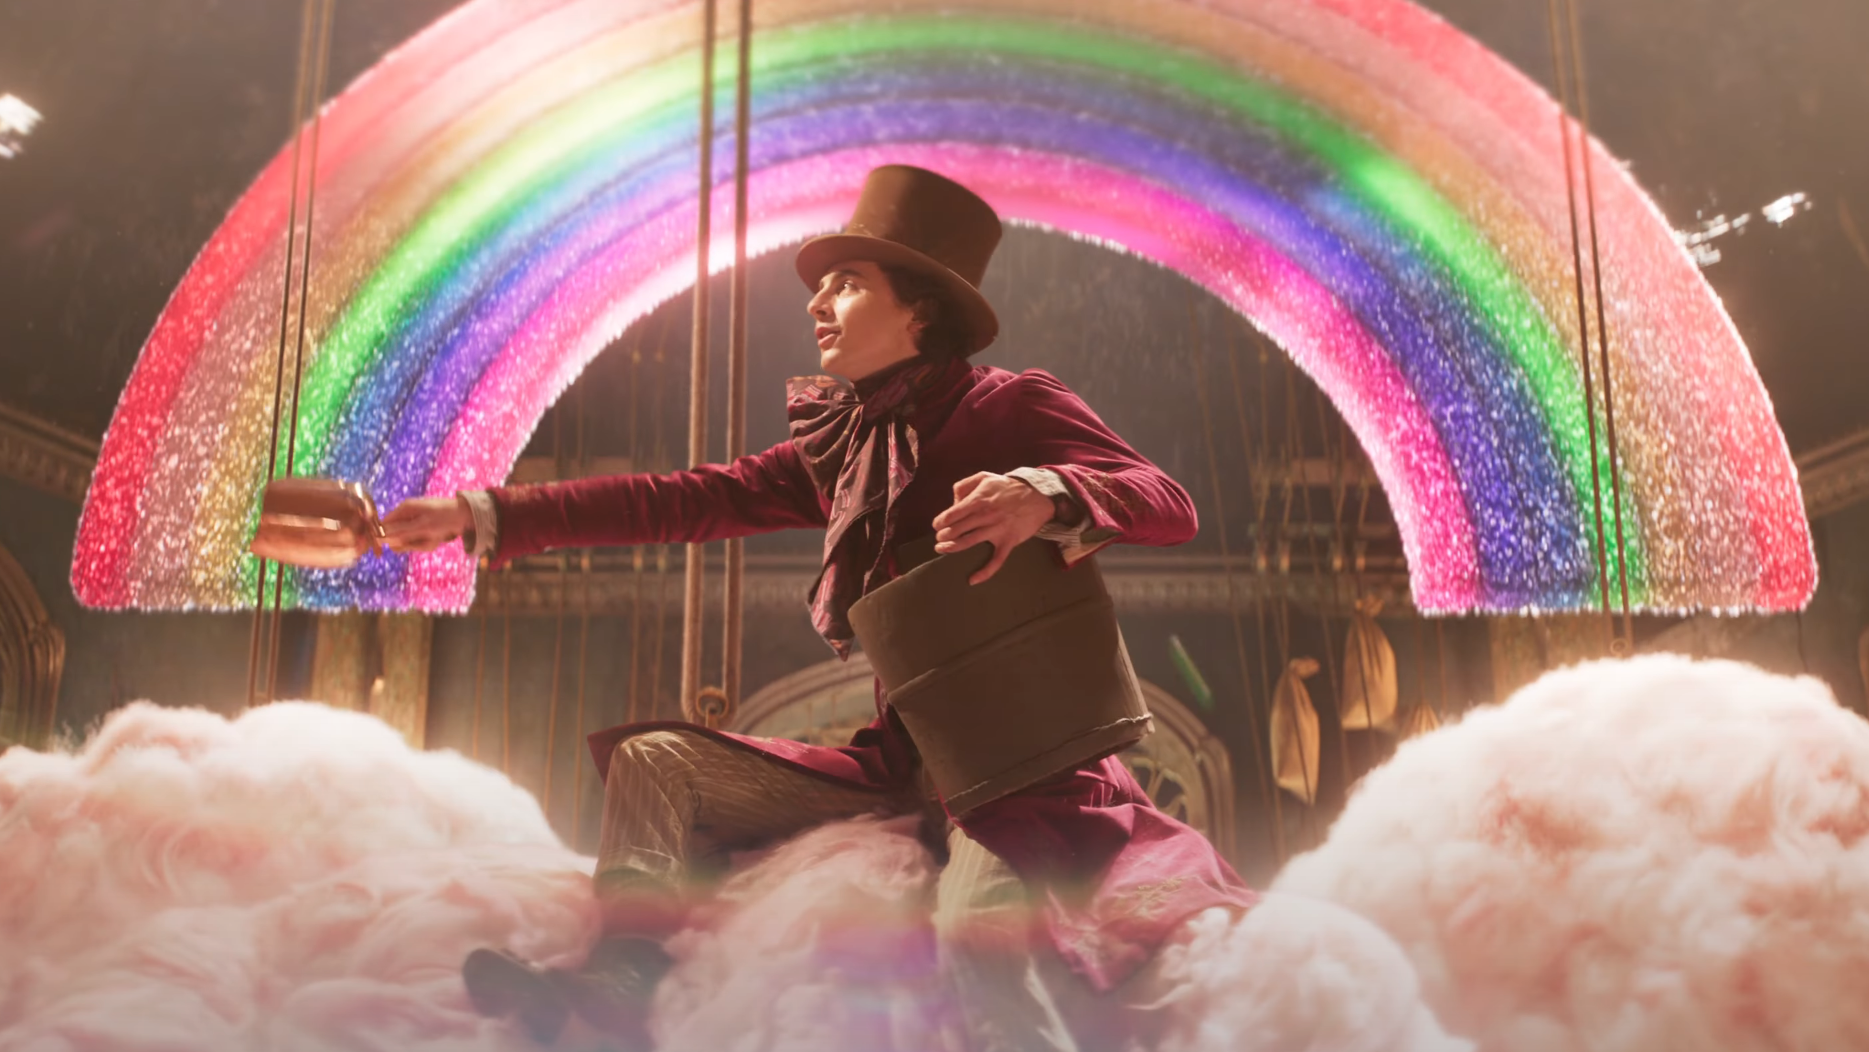 Willy Wonka & the Chocolate Factory (Film) - TV Tropes